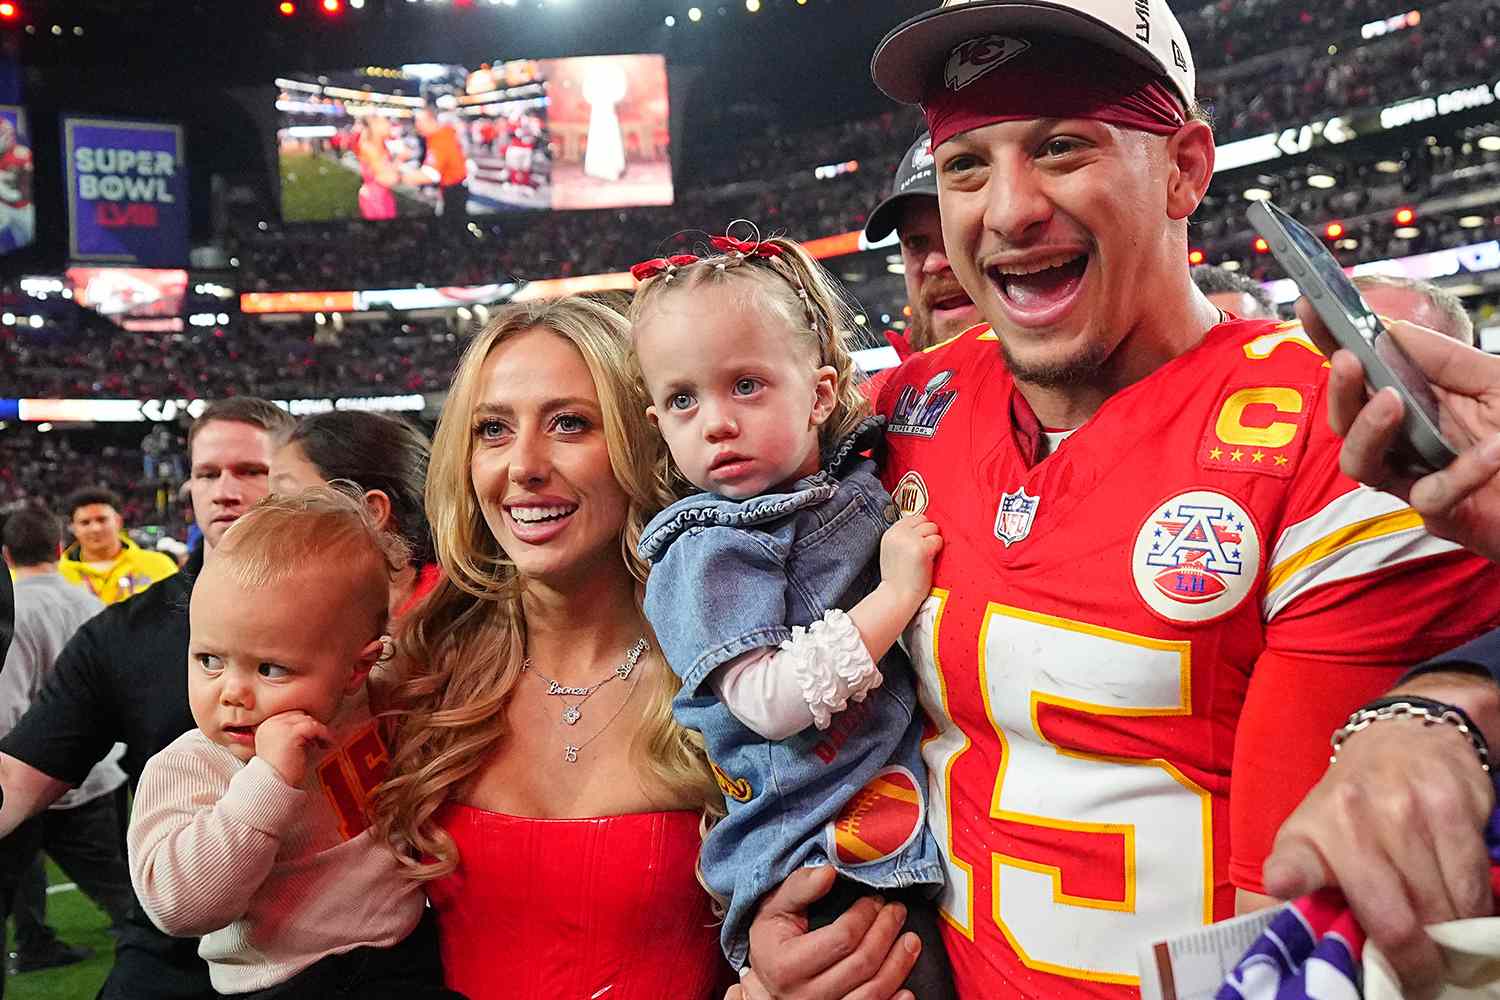 Following the Chiefs' Super Bowl victory, Brittany Mahomes, the wife of quarterback Patrick Mahomes, posts fresh photos of the couple at Disneyland and challenges the quarterback to repeat the feat: "Dad, same time next year?" - Mnews